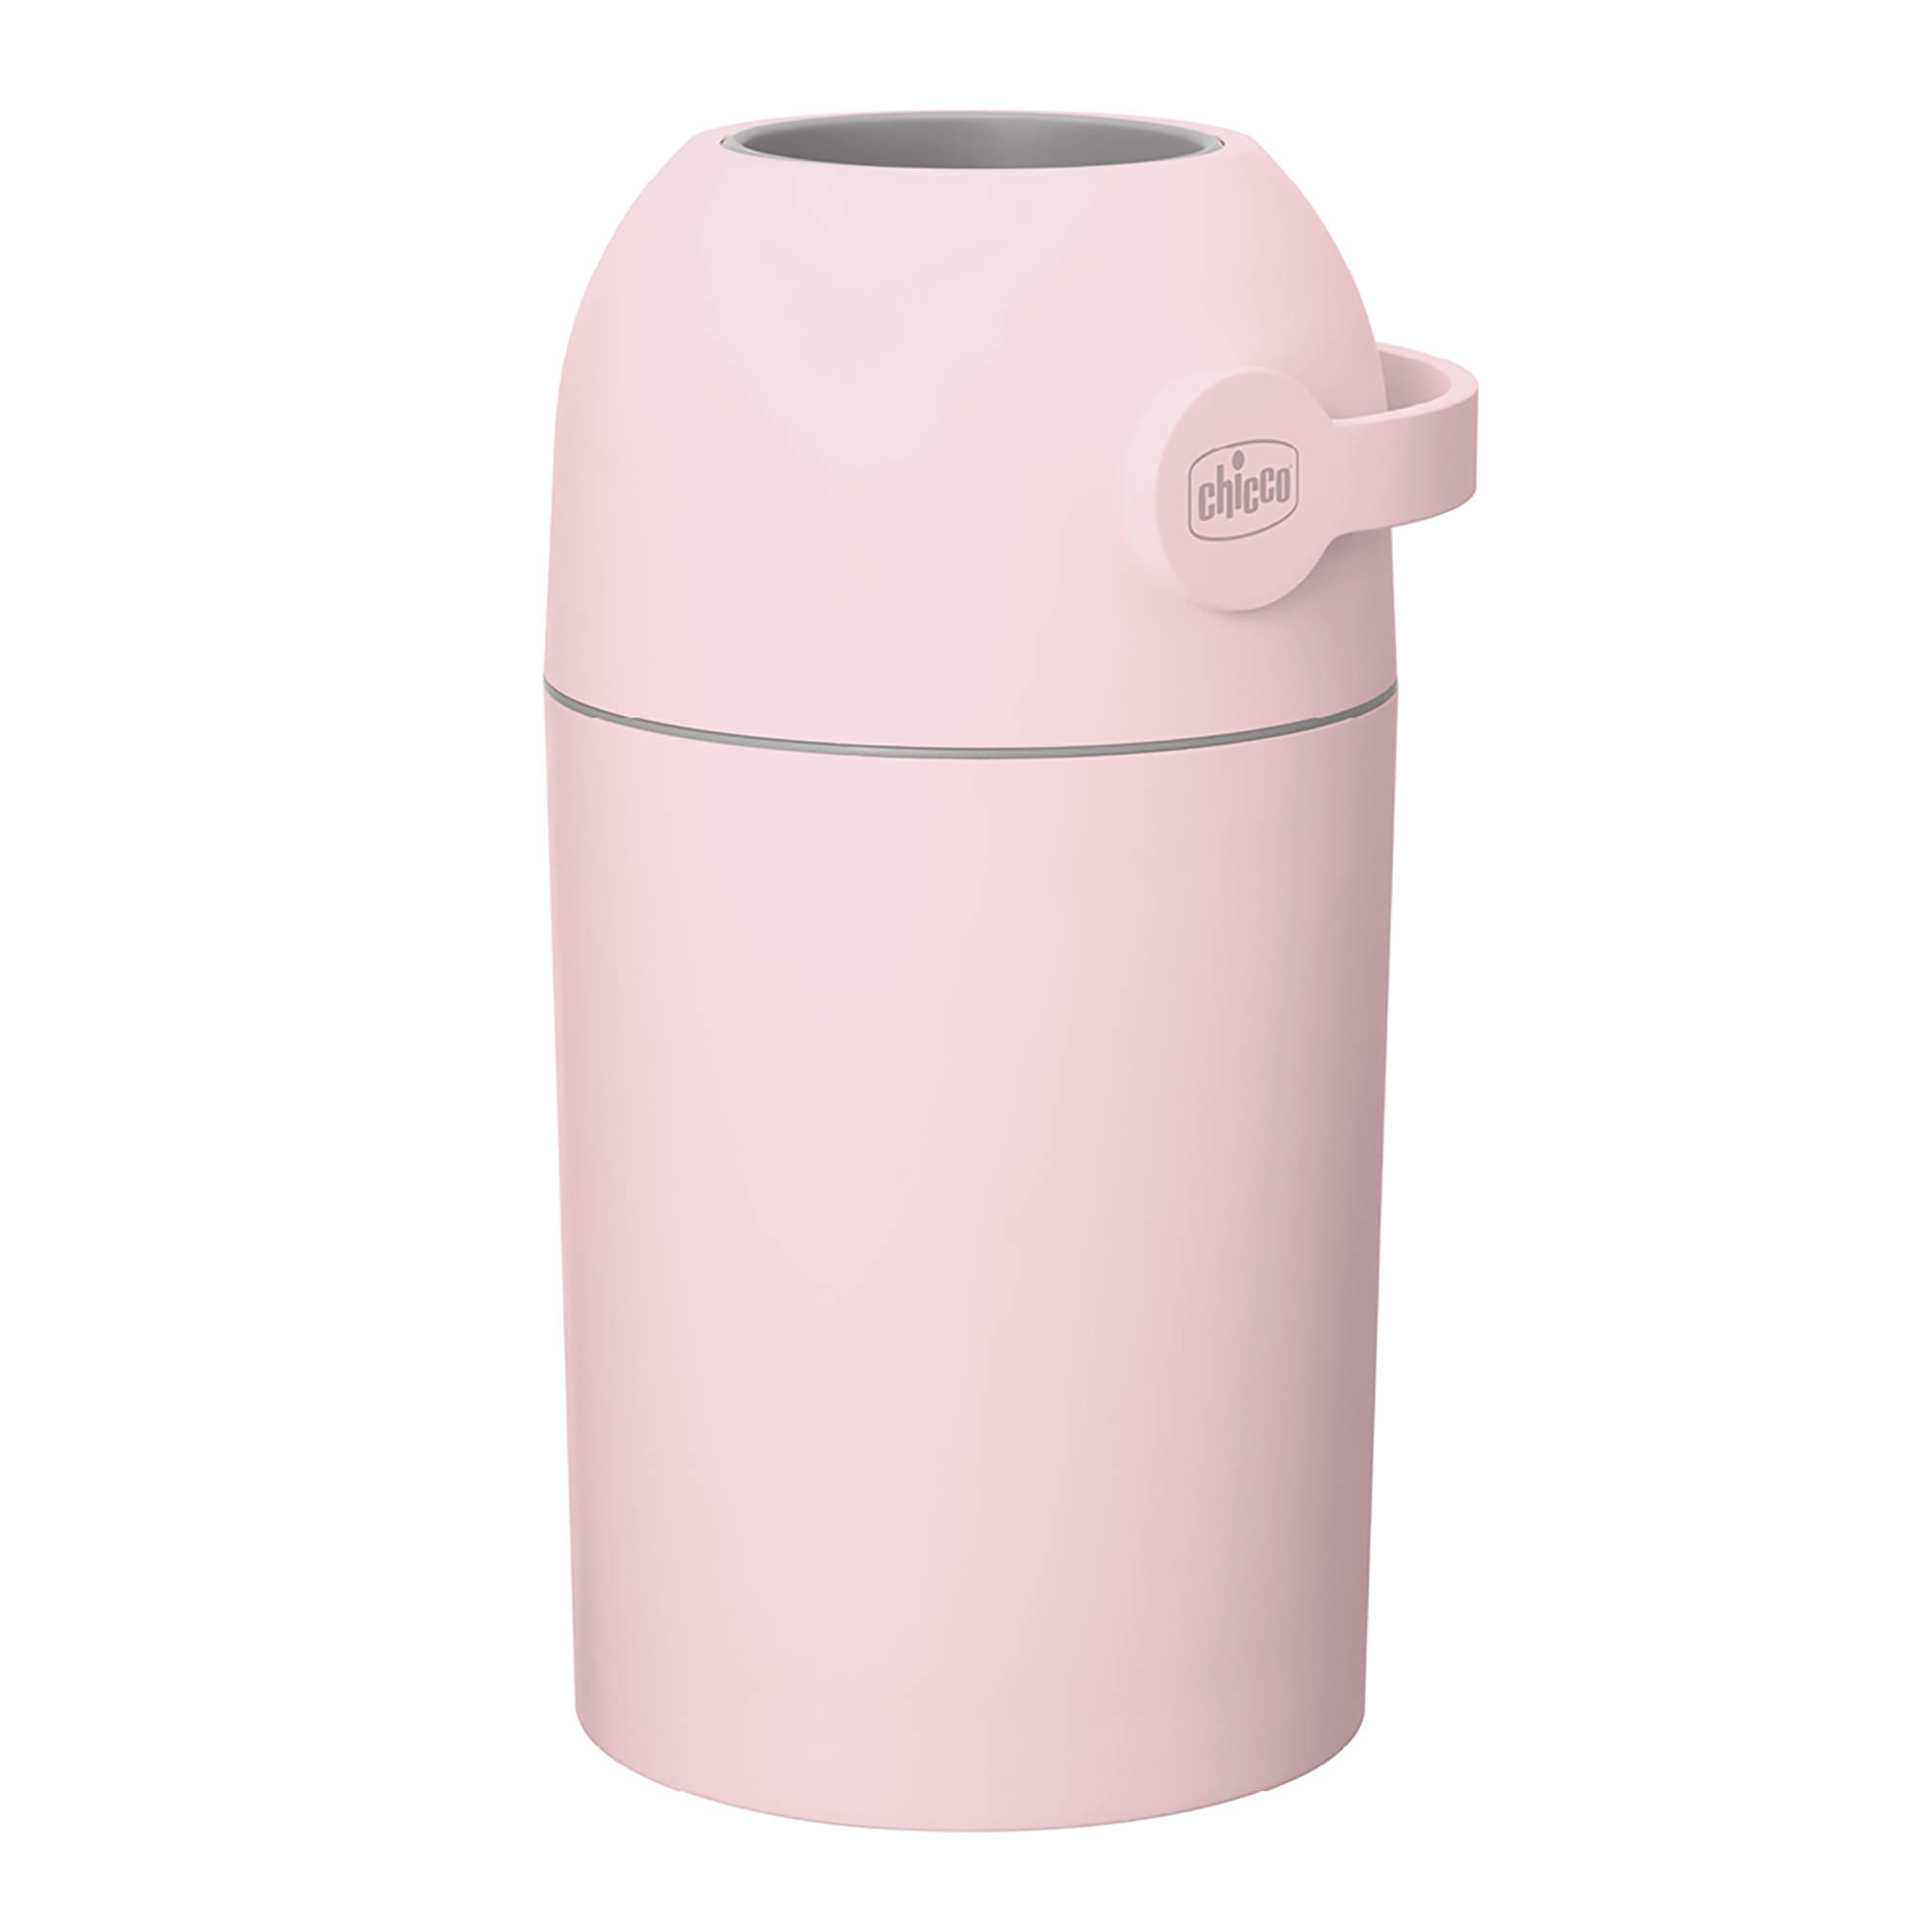 Windeleimer Odour Off Pink chicco Rosa 2000576153801 1